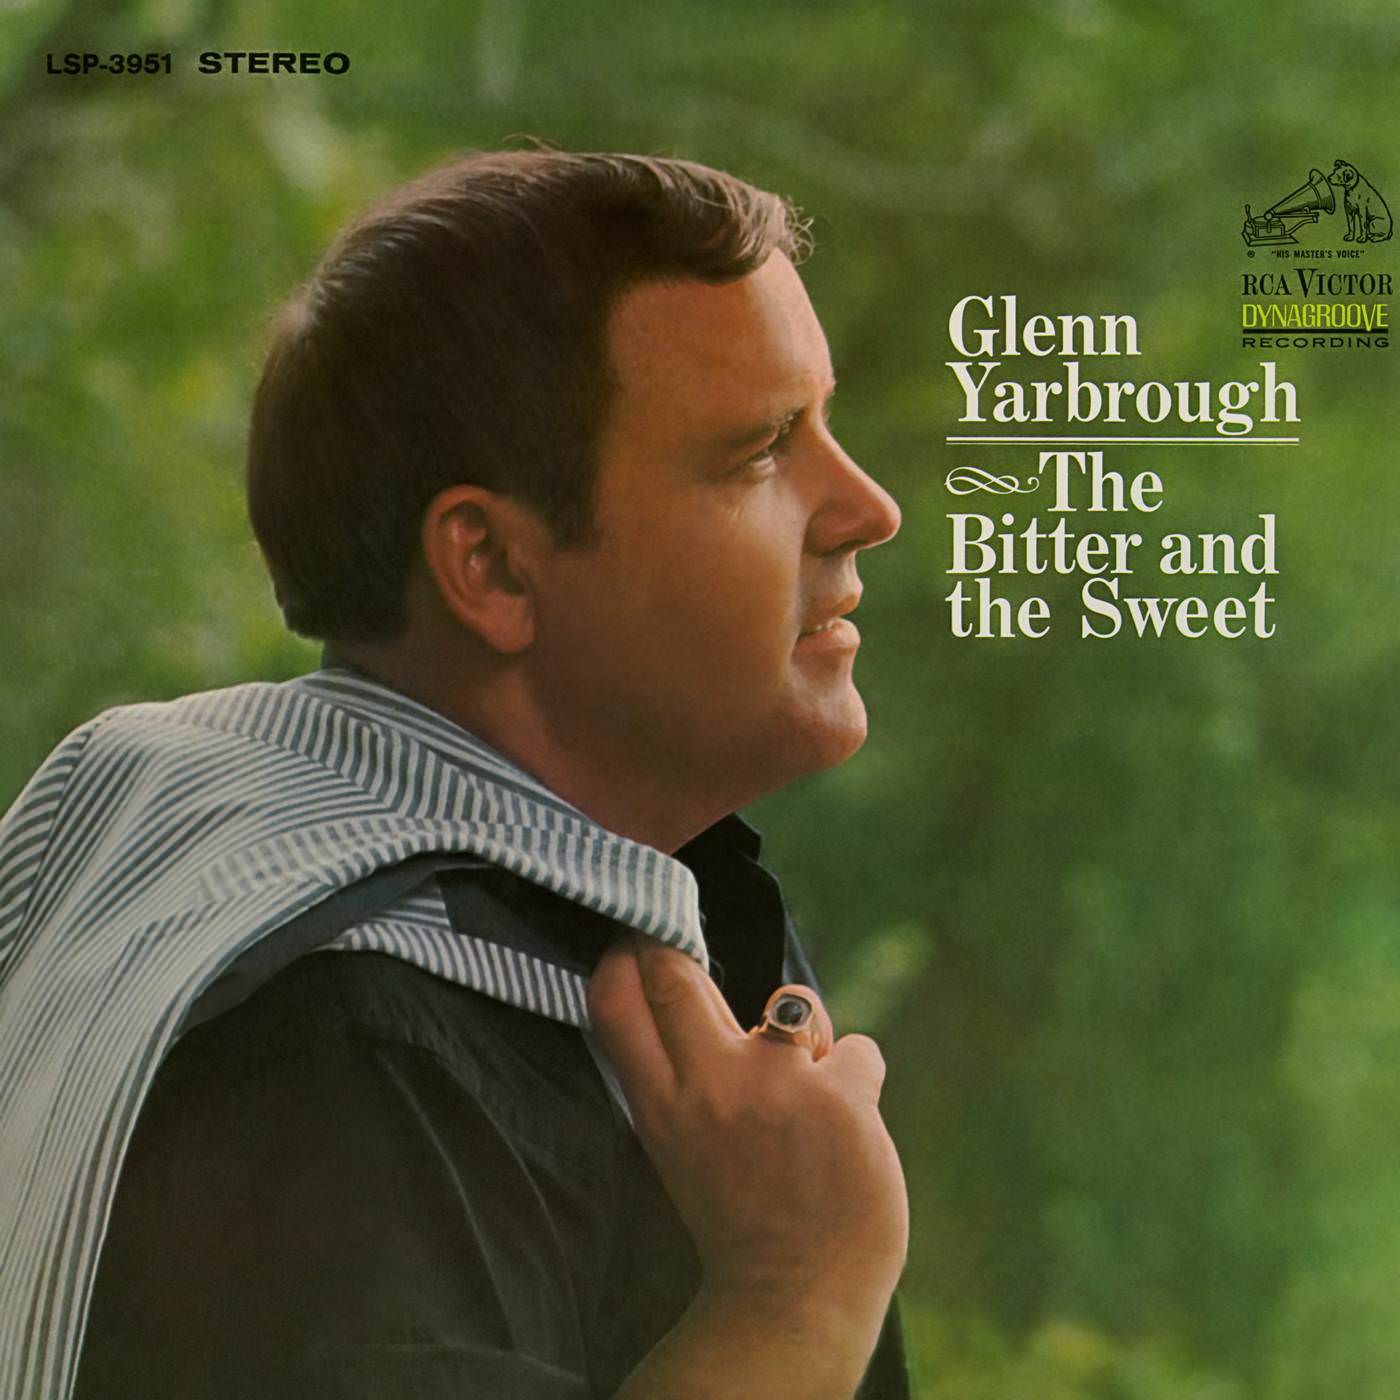 Glenn Yarbrough - The Bitter And The Sweet (1968/2018) [AcousticSounds FLAC 24bit/192kHz]